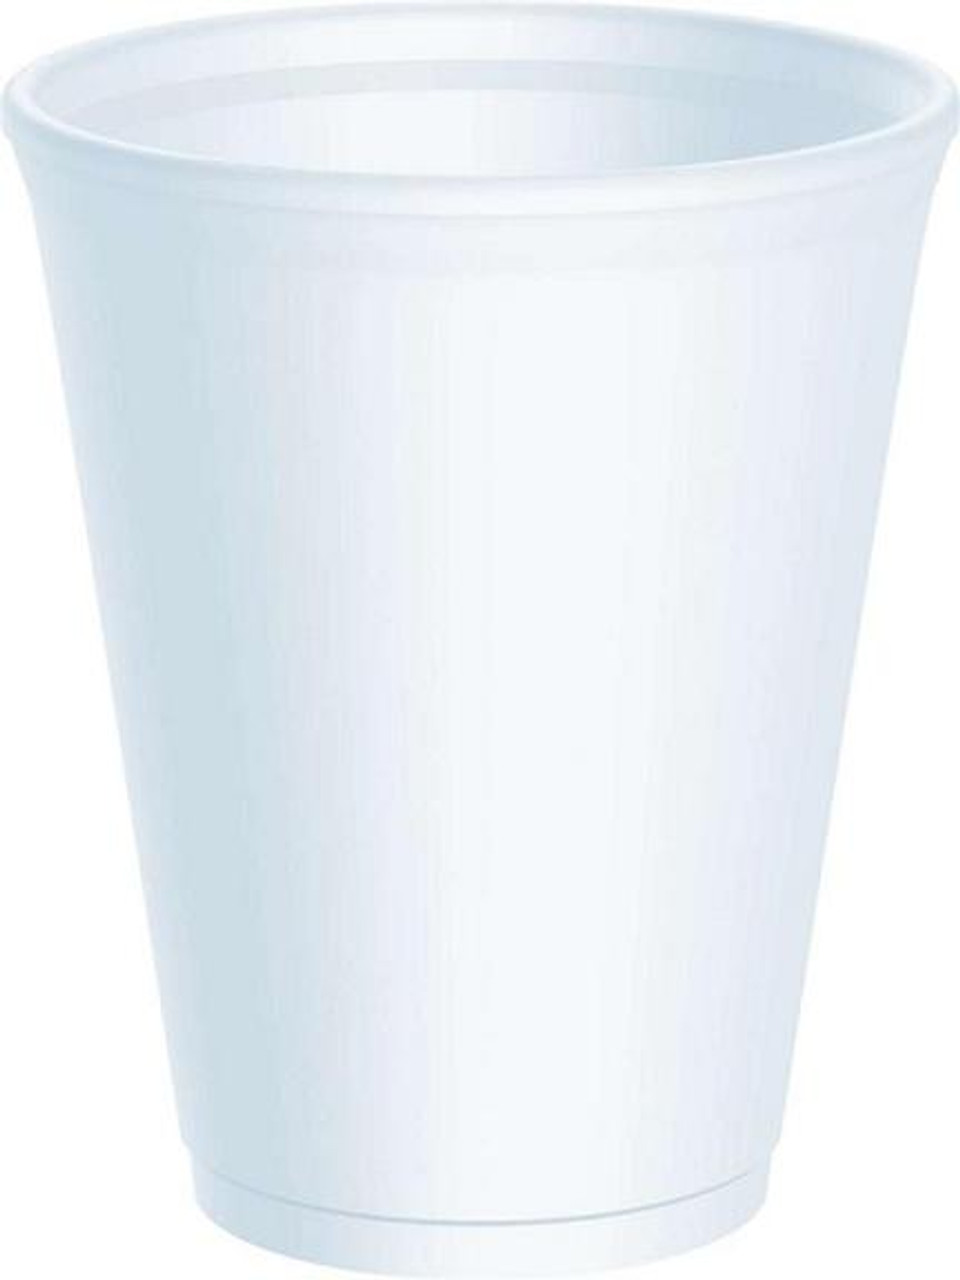 https://cdn11.bigcommerce.com/s-0evtp/images/stencil/1280x1280/products/2041/2591/12oz_Dart_Polystyrene_Cup_Whitex20__31518.1415010363.jpg?c=2&imbypass=on